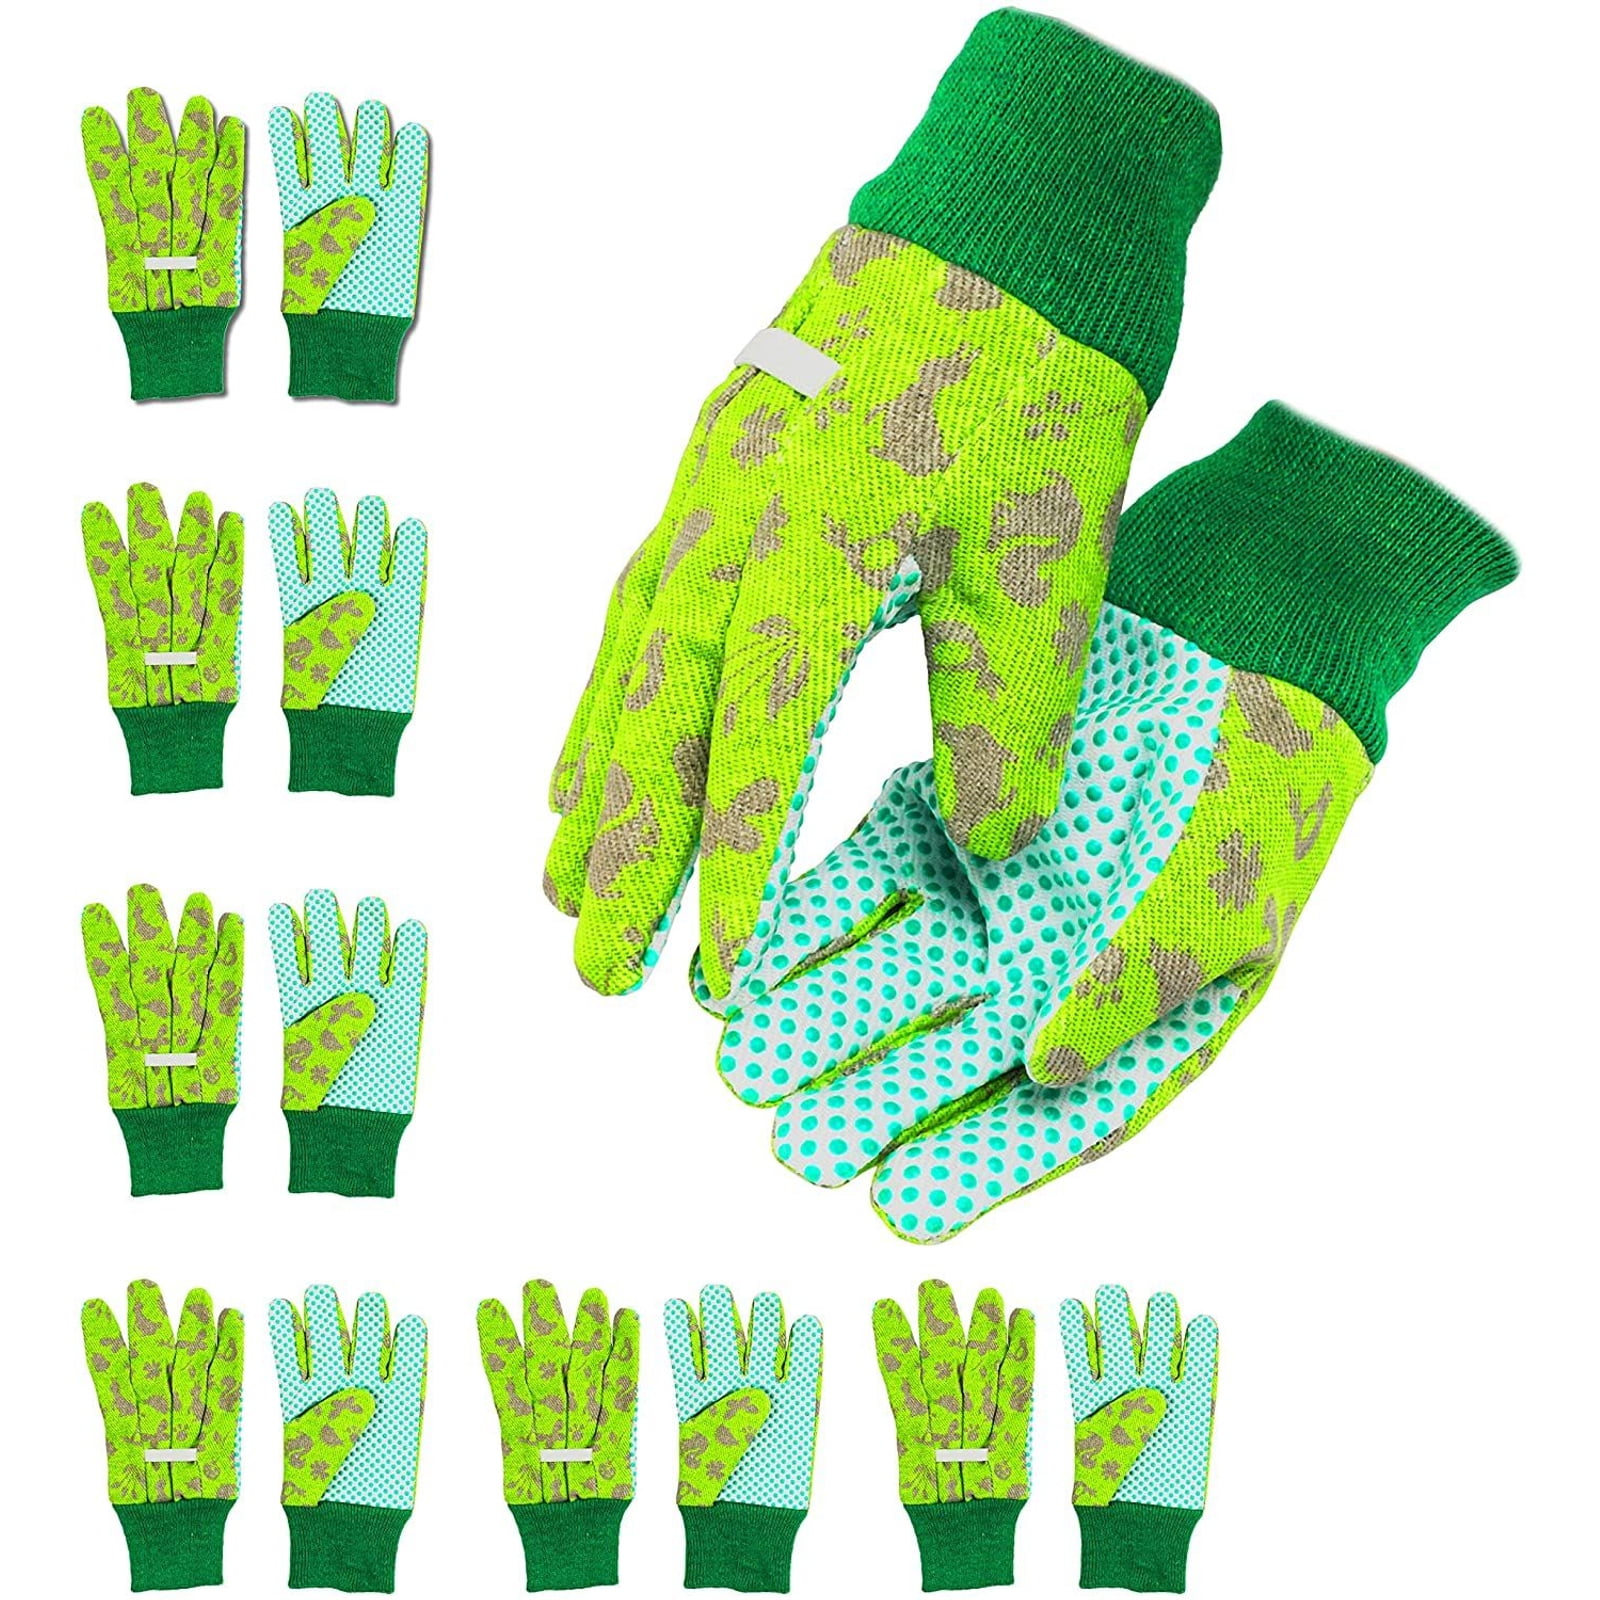 3 Pairs Kids Latex Gardening Gloves for Ages 2-10 1 Pair UV Sun Protection Arm Sleeves Child Toddlers Breathable Rubber Coated Yard Work Gloves for Boys & Girls Green & Yellow & Pink